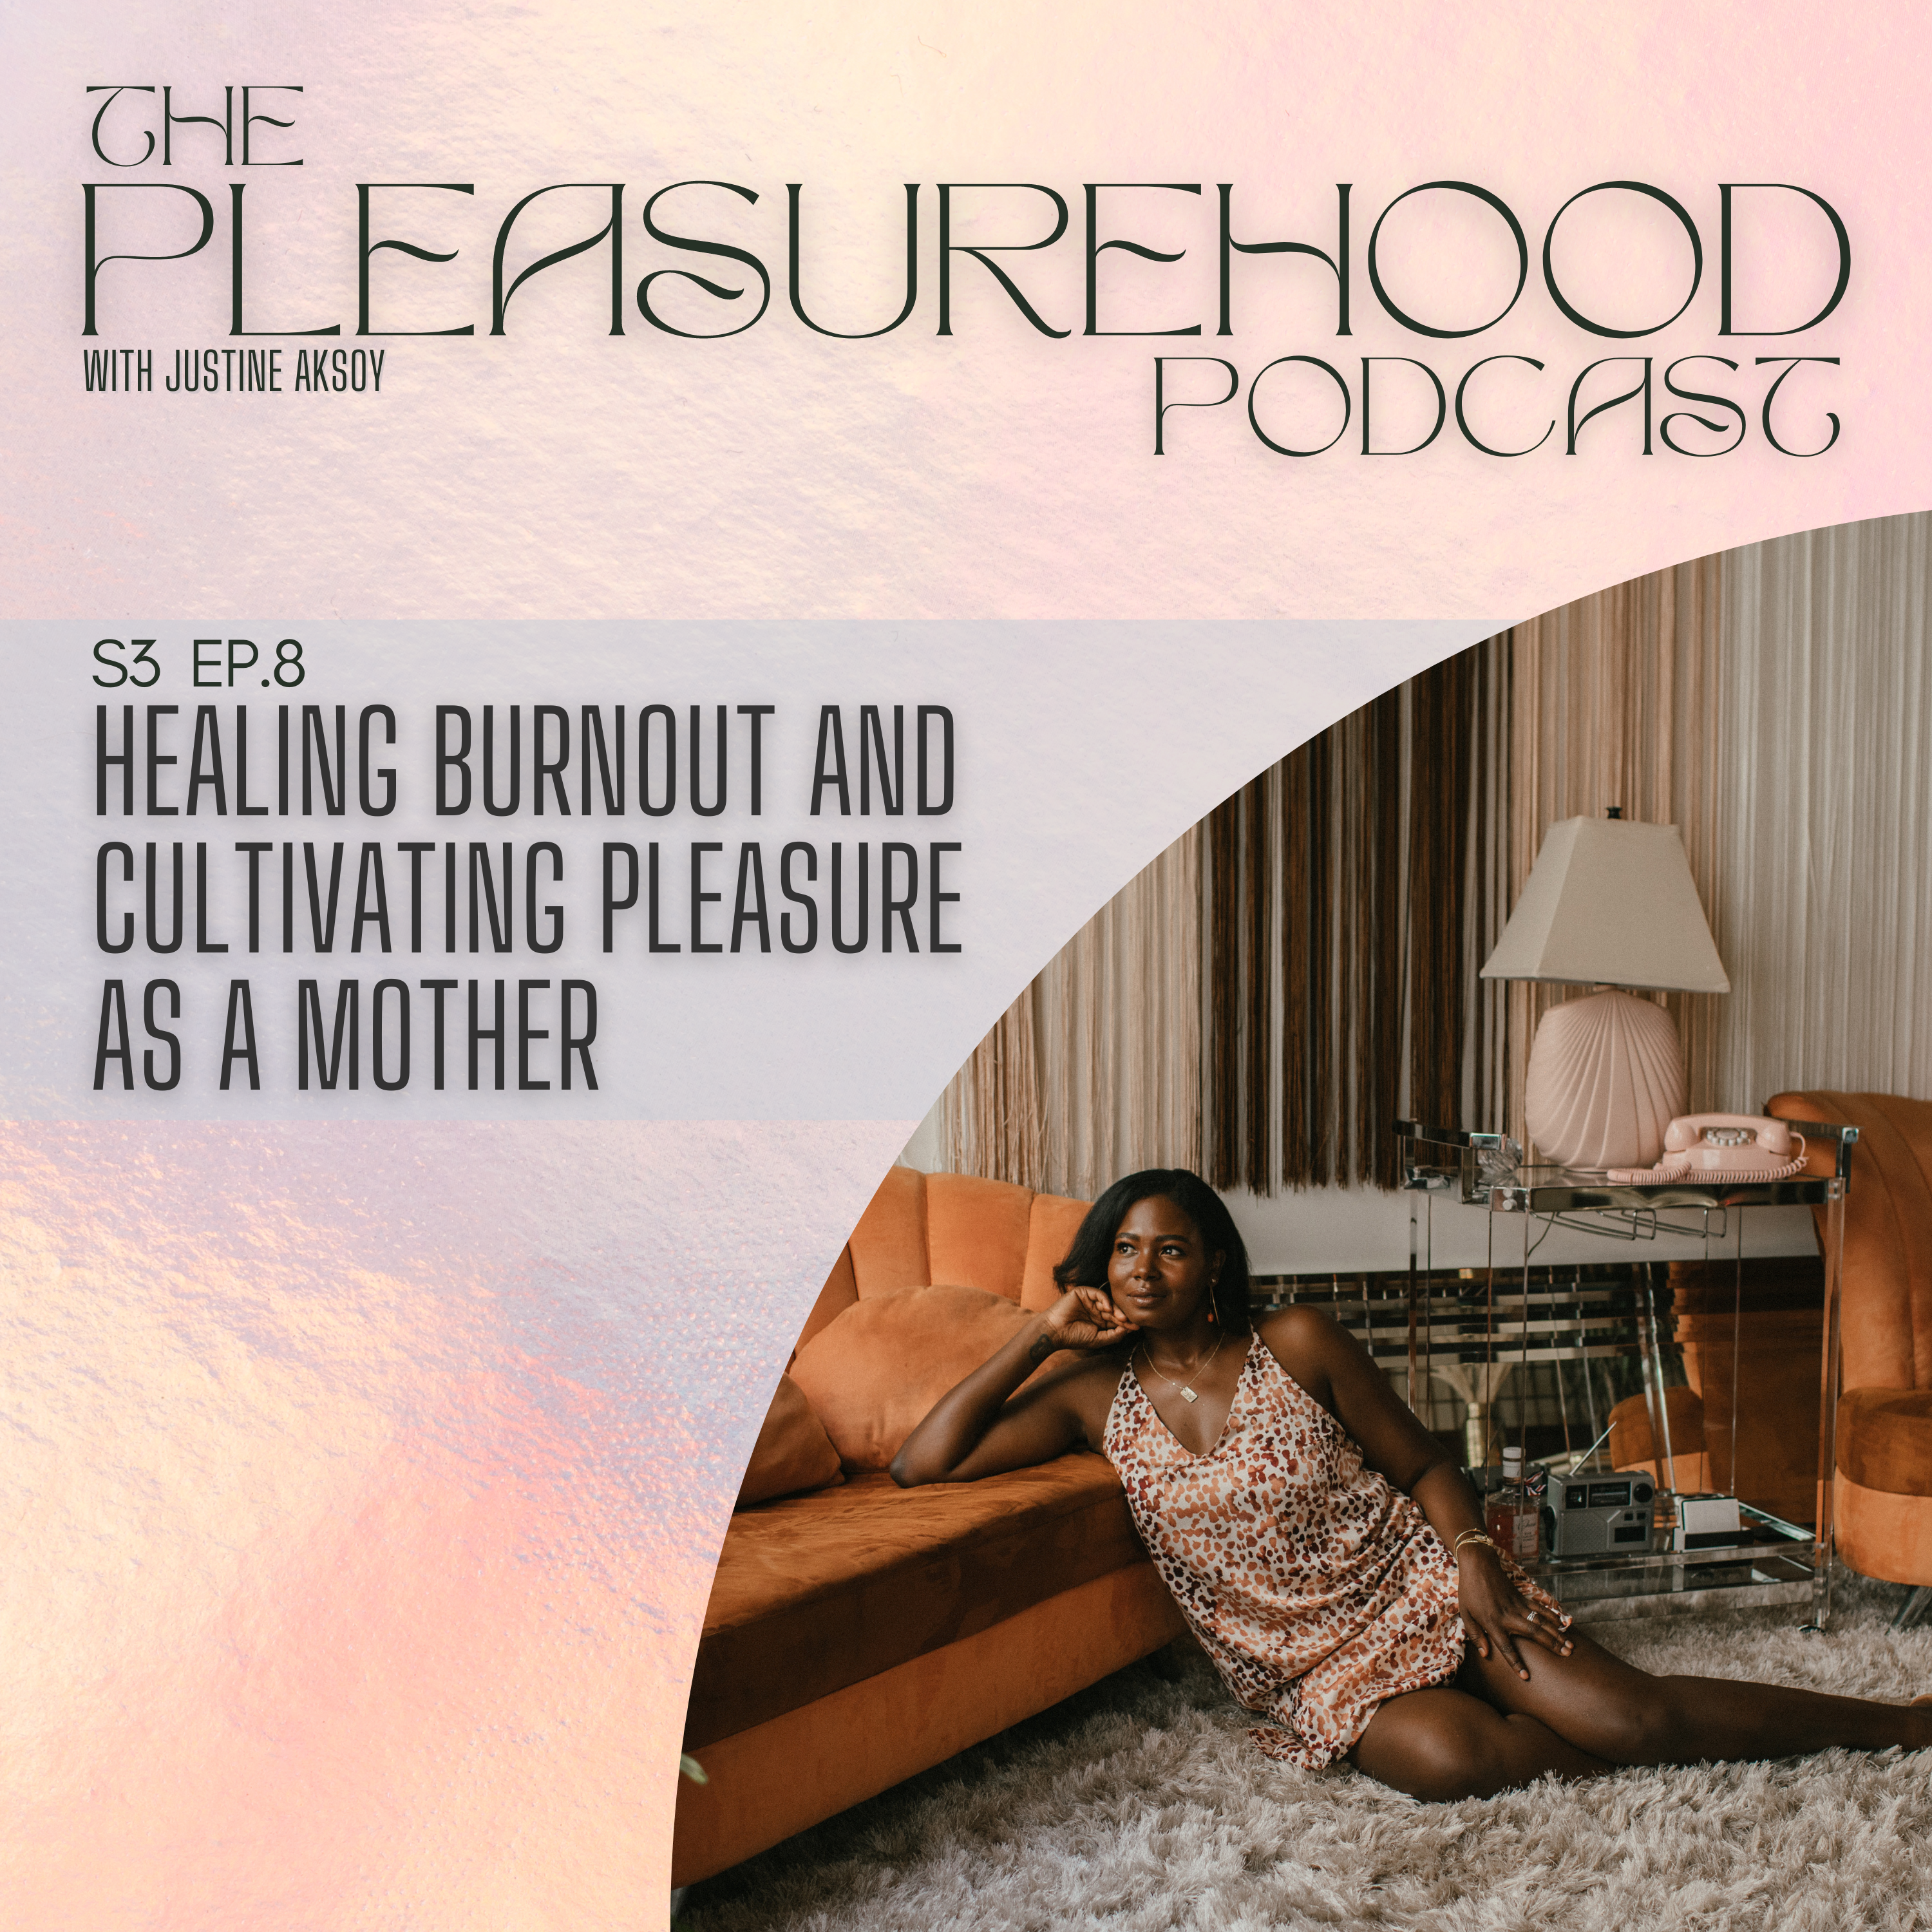 Healing Burnout and Cultivating Pleasure as a Mother